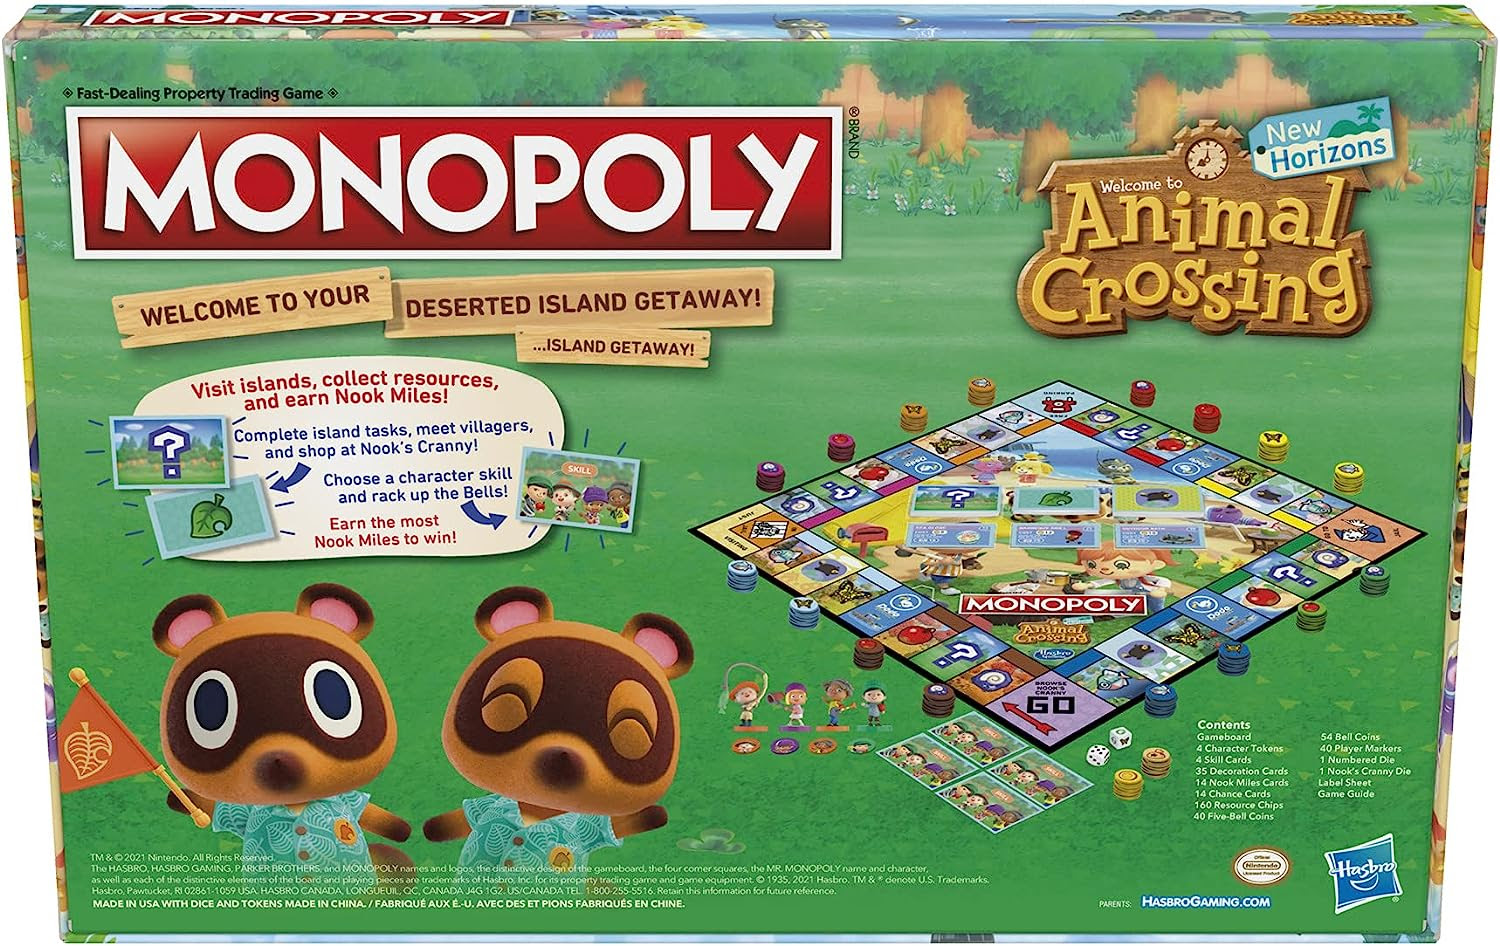 Monopoly Animal Crossing New Horizons Edition Board Game. 7200 units. 